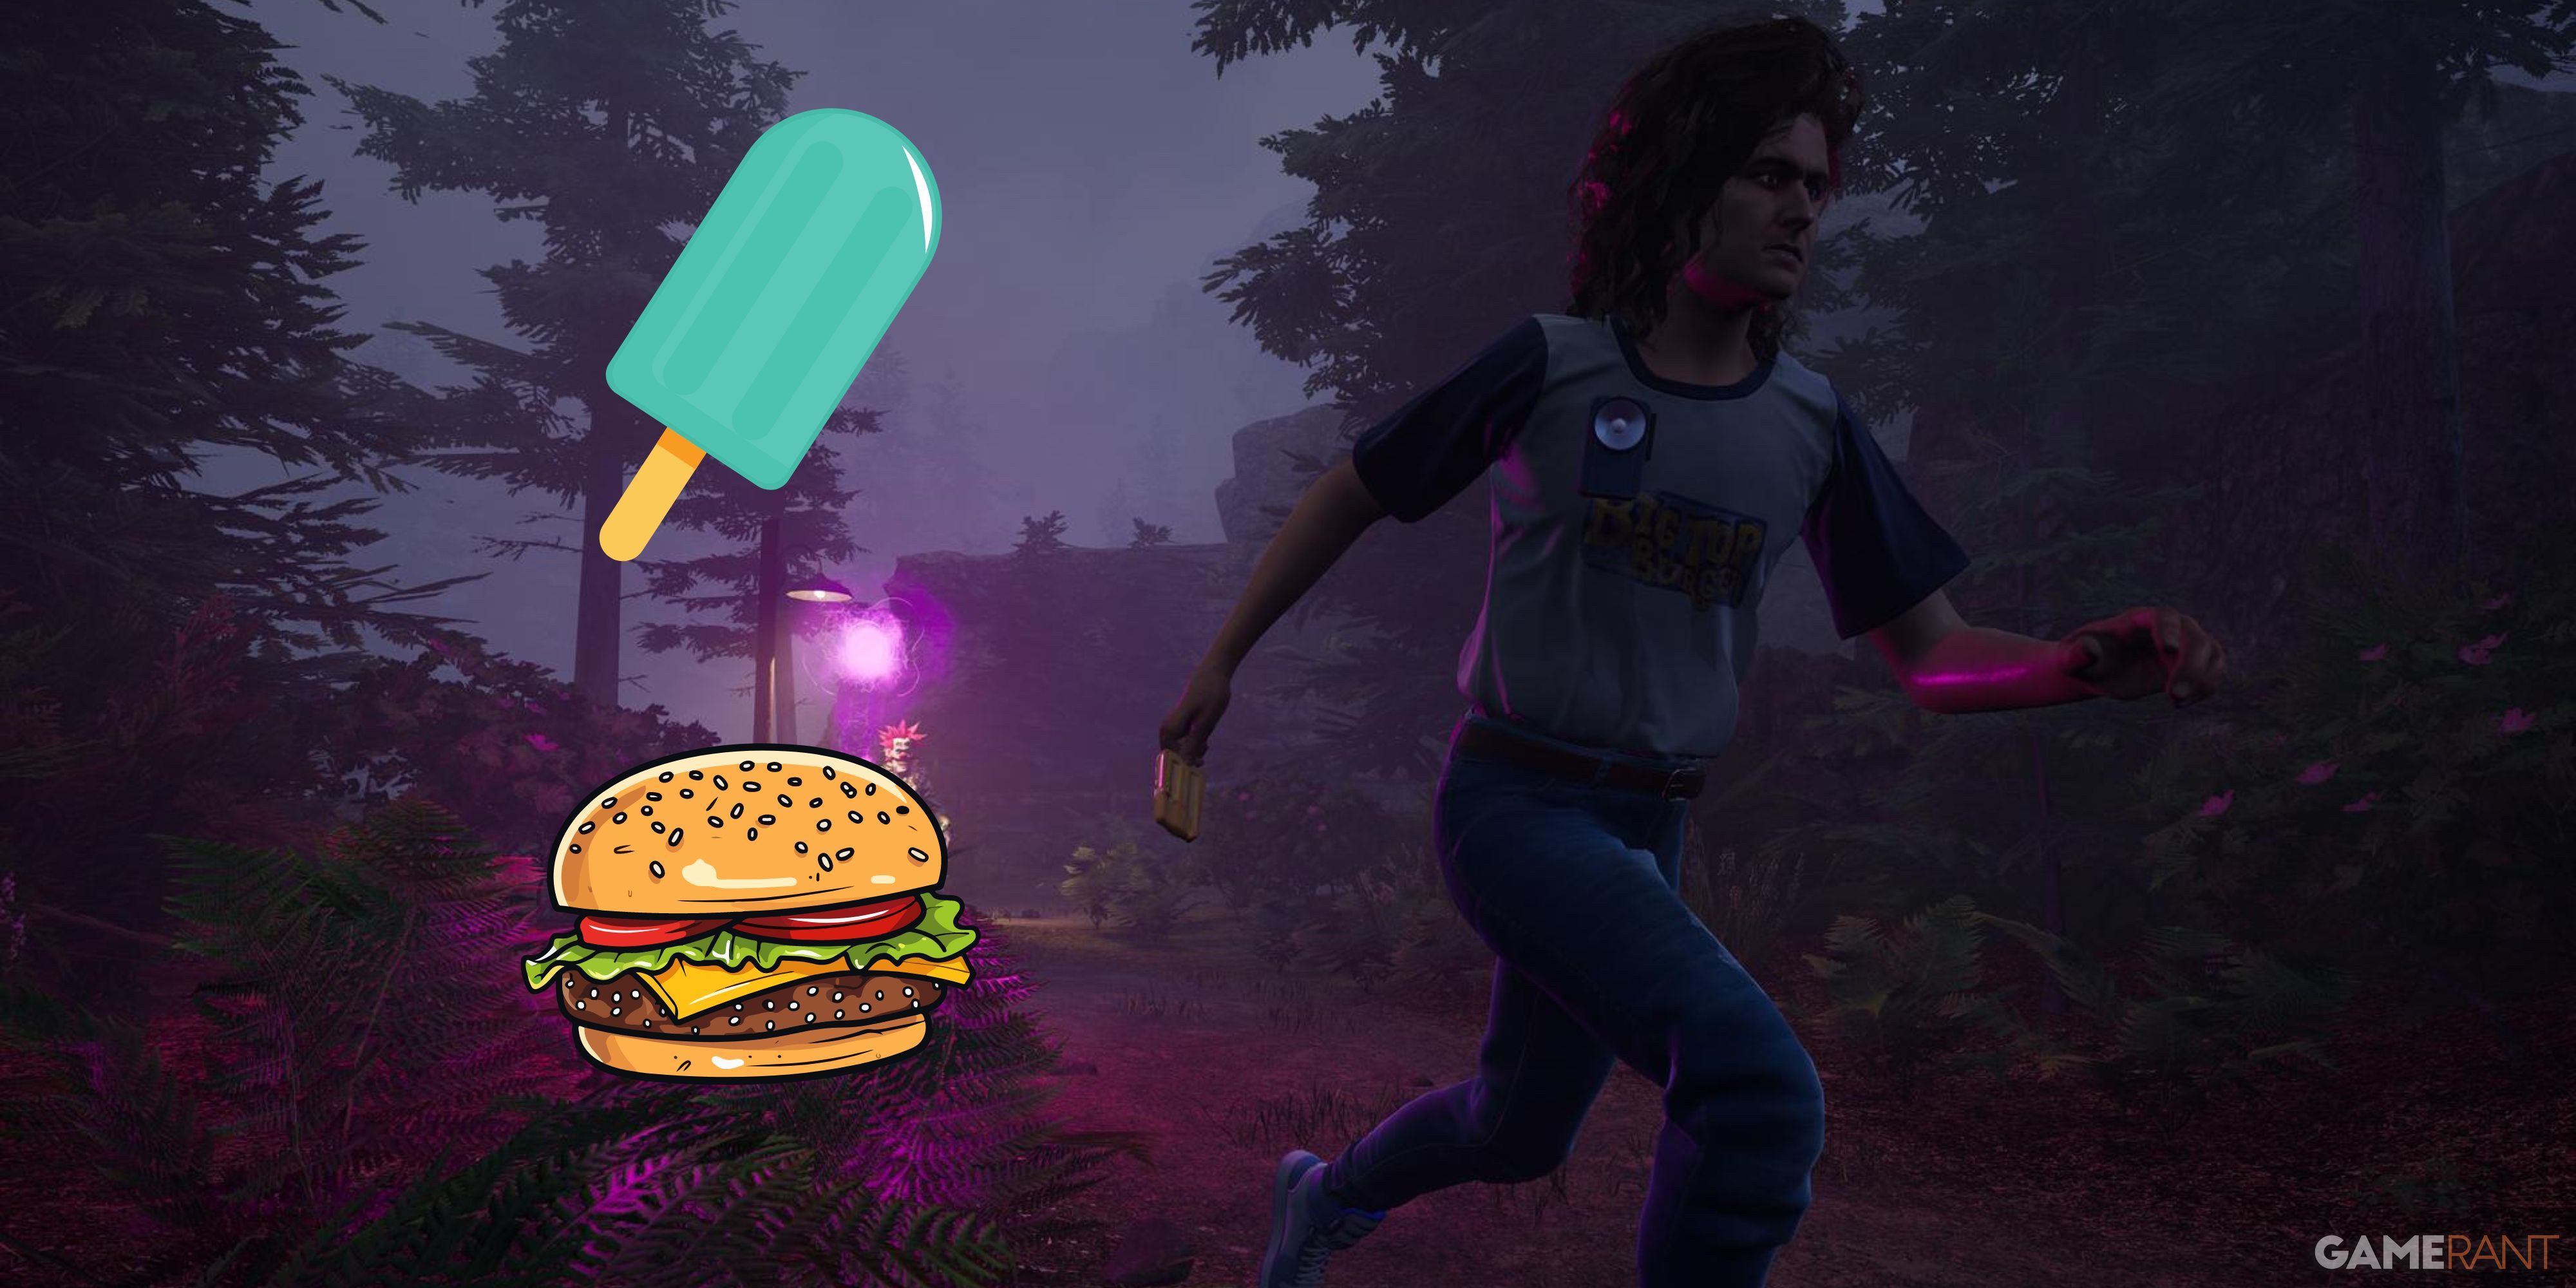 A human running alongside a burger and popsicle